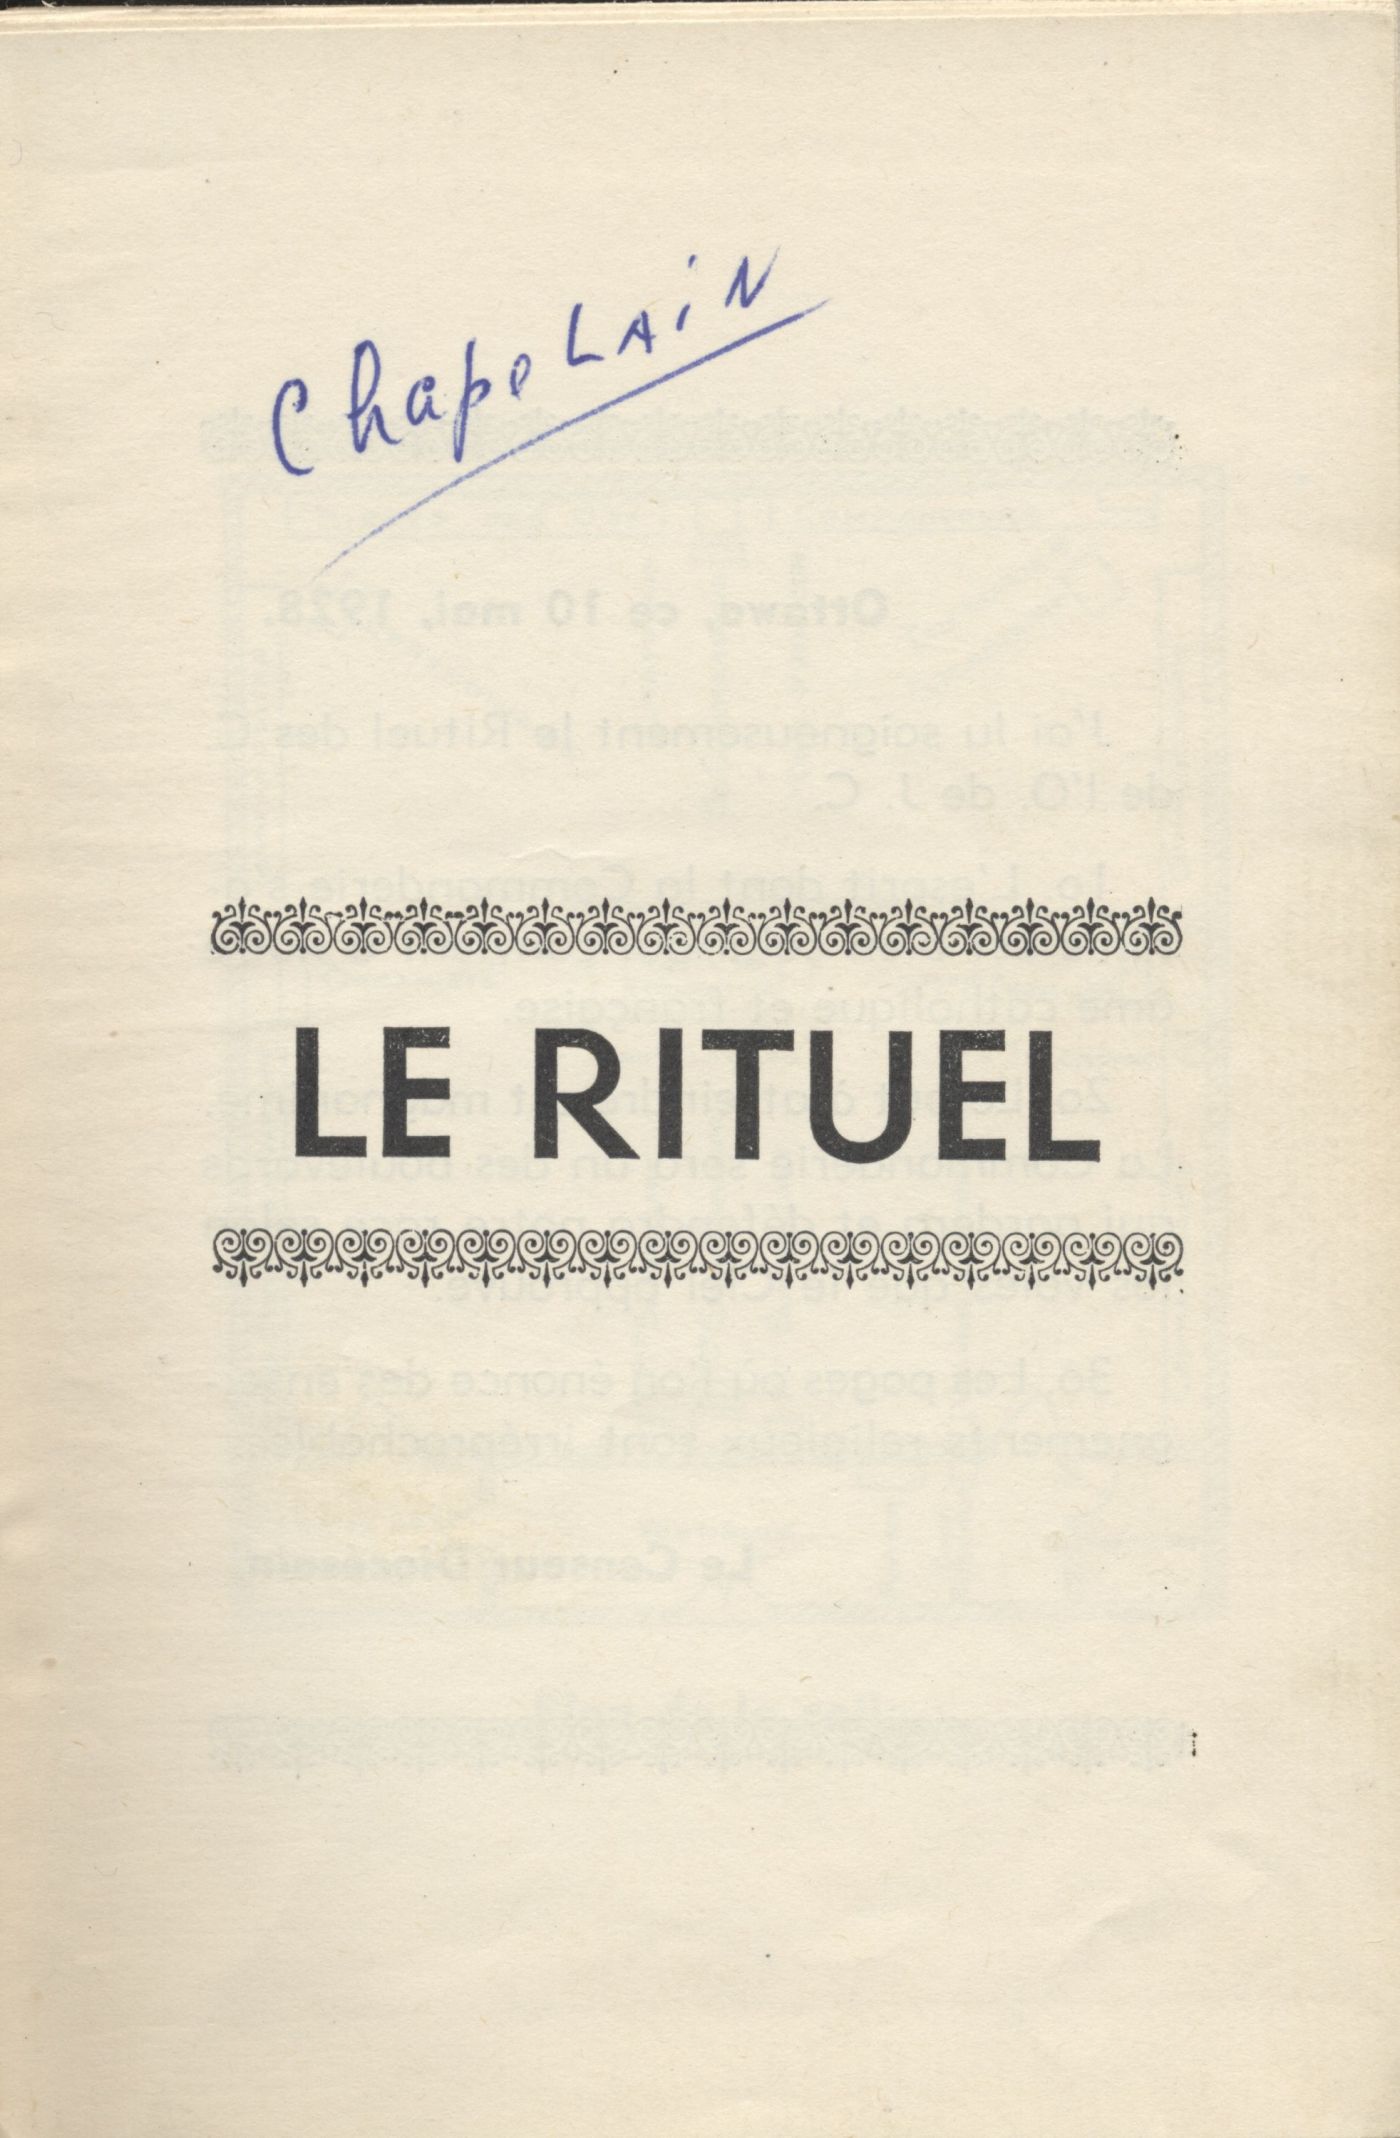 Document printed in French. The front cover has a title, positioned between two decorative borders above and below the words. The word “chapelain” is handwritten in blue ink at the top of the page. It includes three remarks by the diocesan censor, and the date, as well as the detailed plan of a room and the place occupied by various participants.